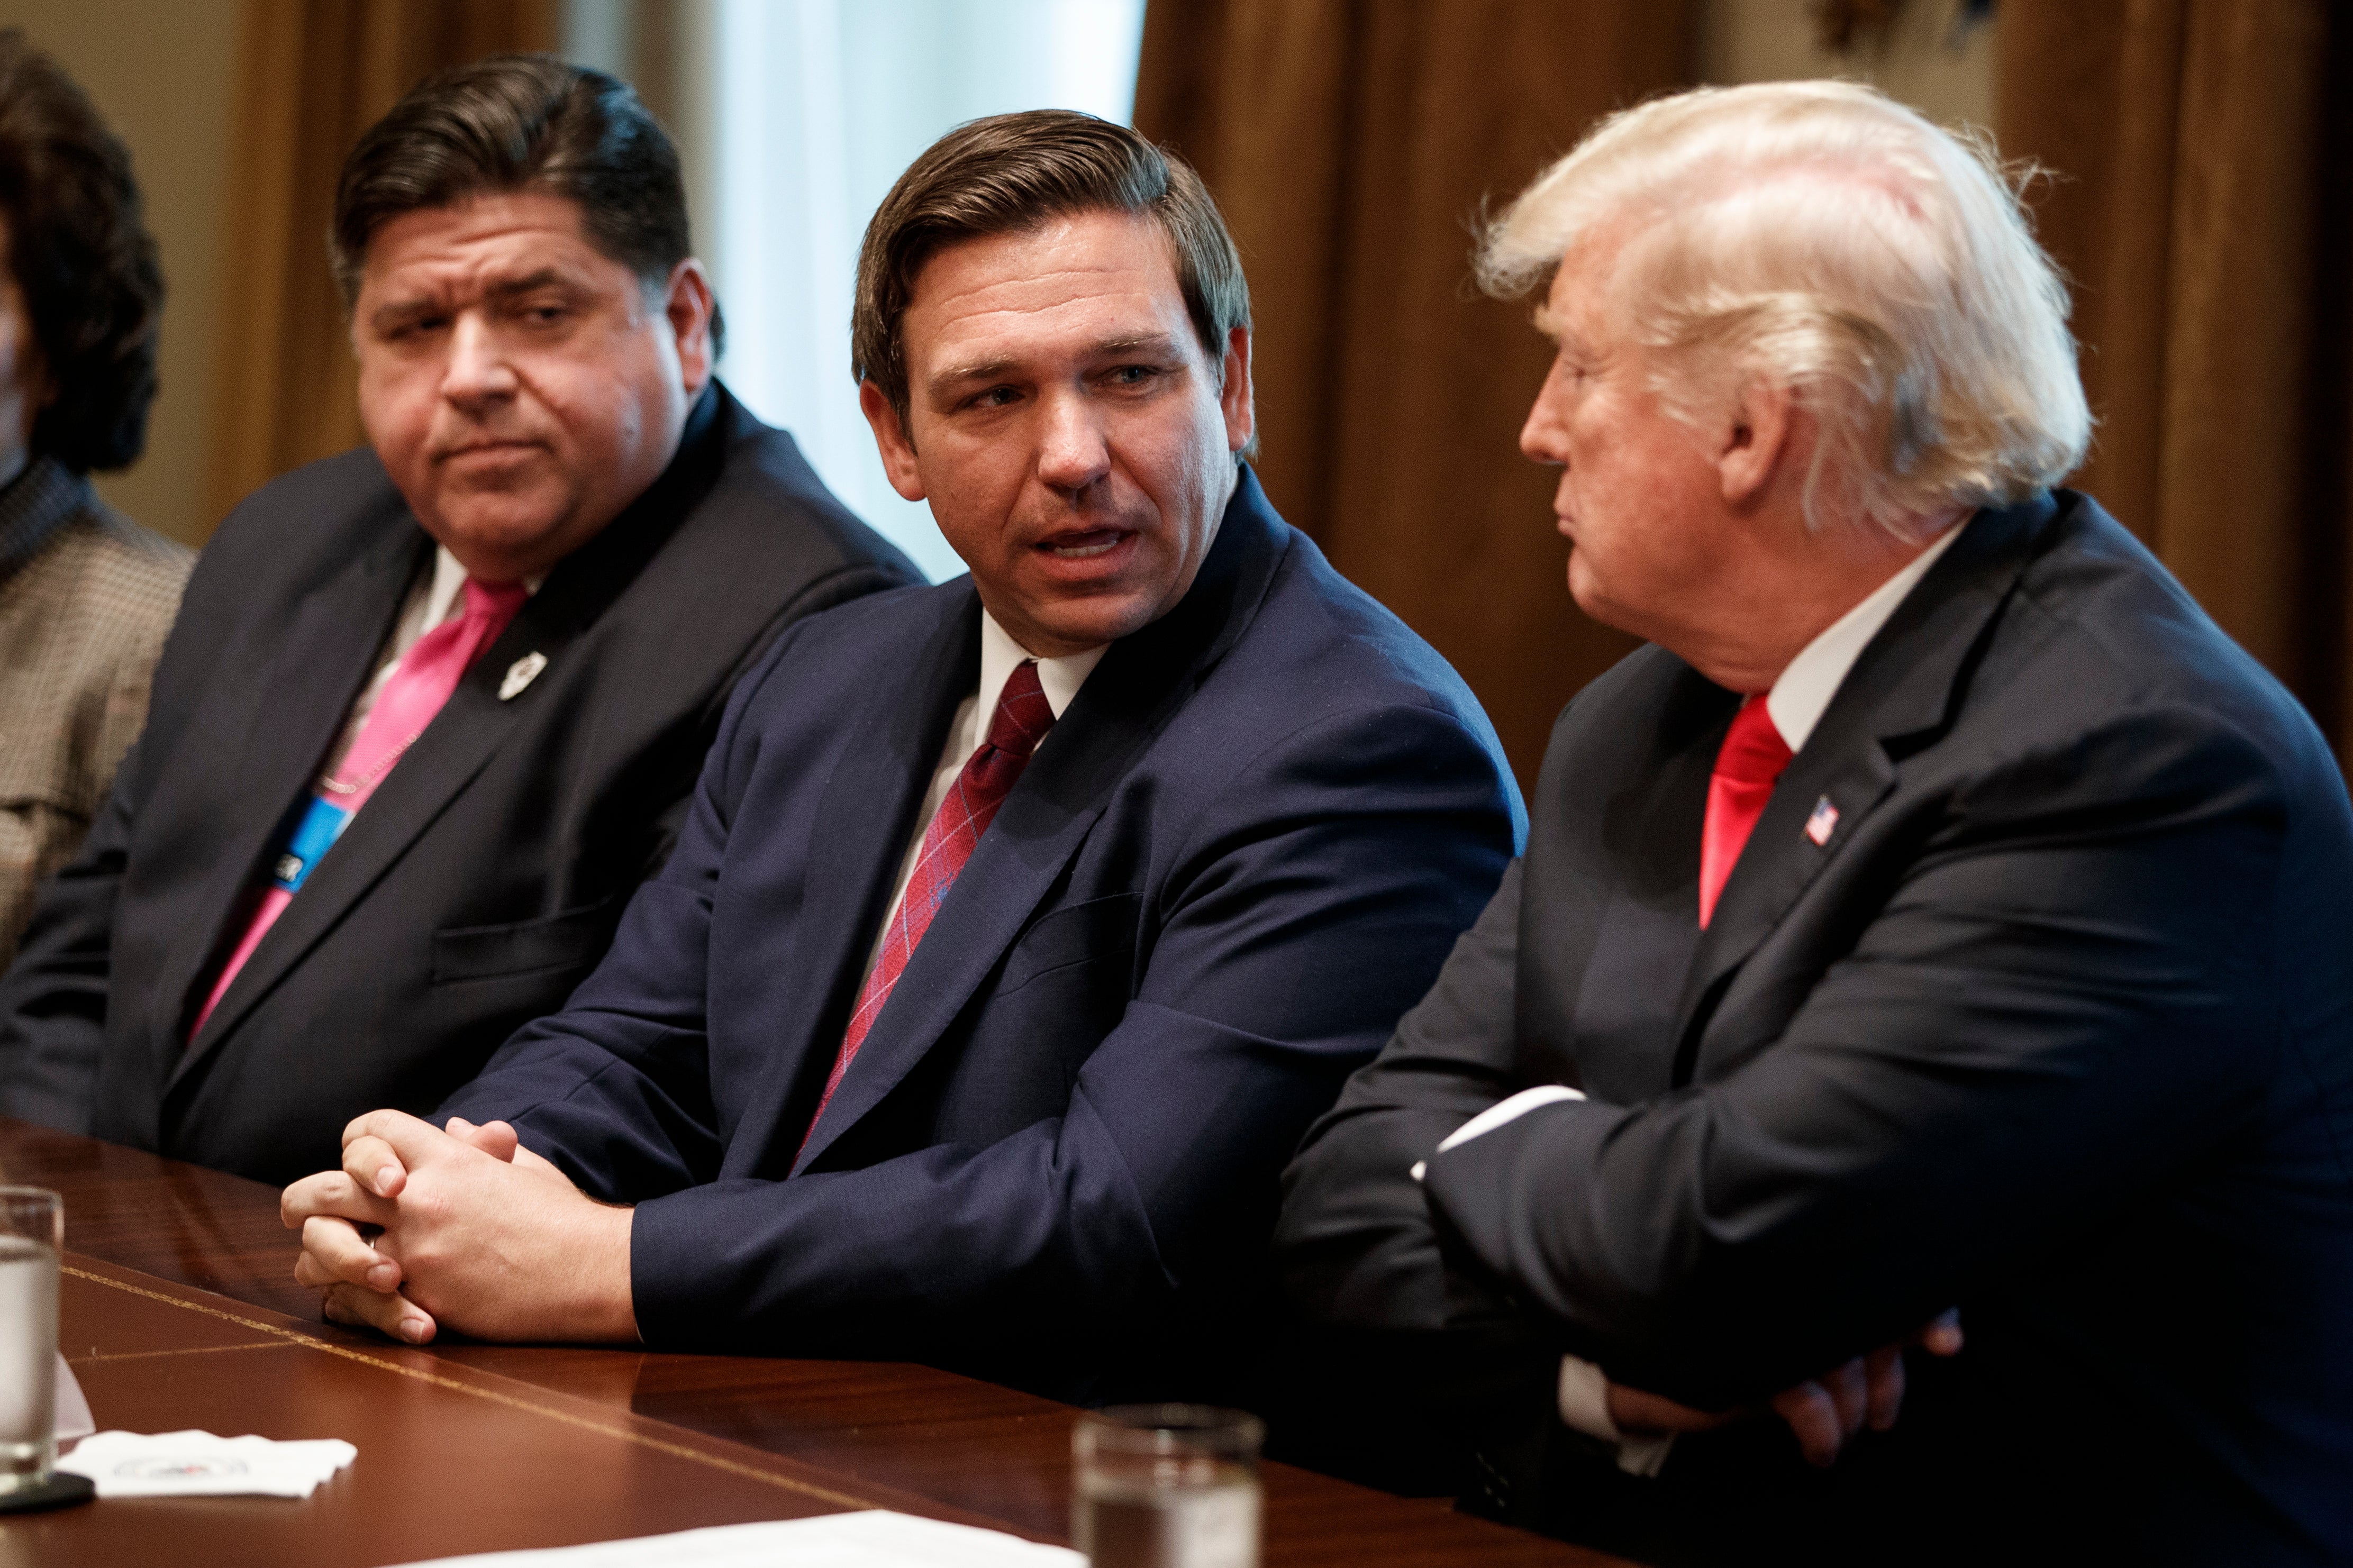 DeSantis faces a tough fight for the GOP nomination against former ally Donald Trump